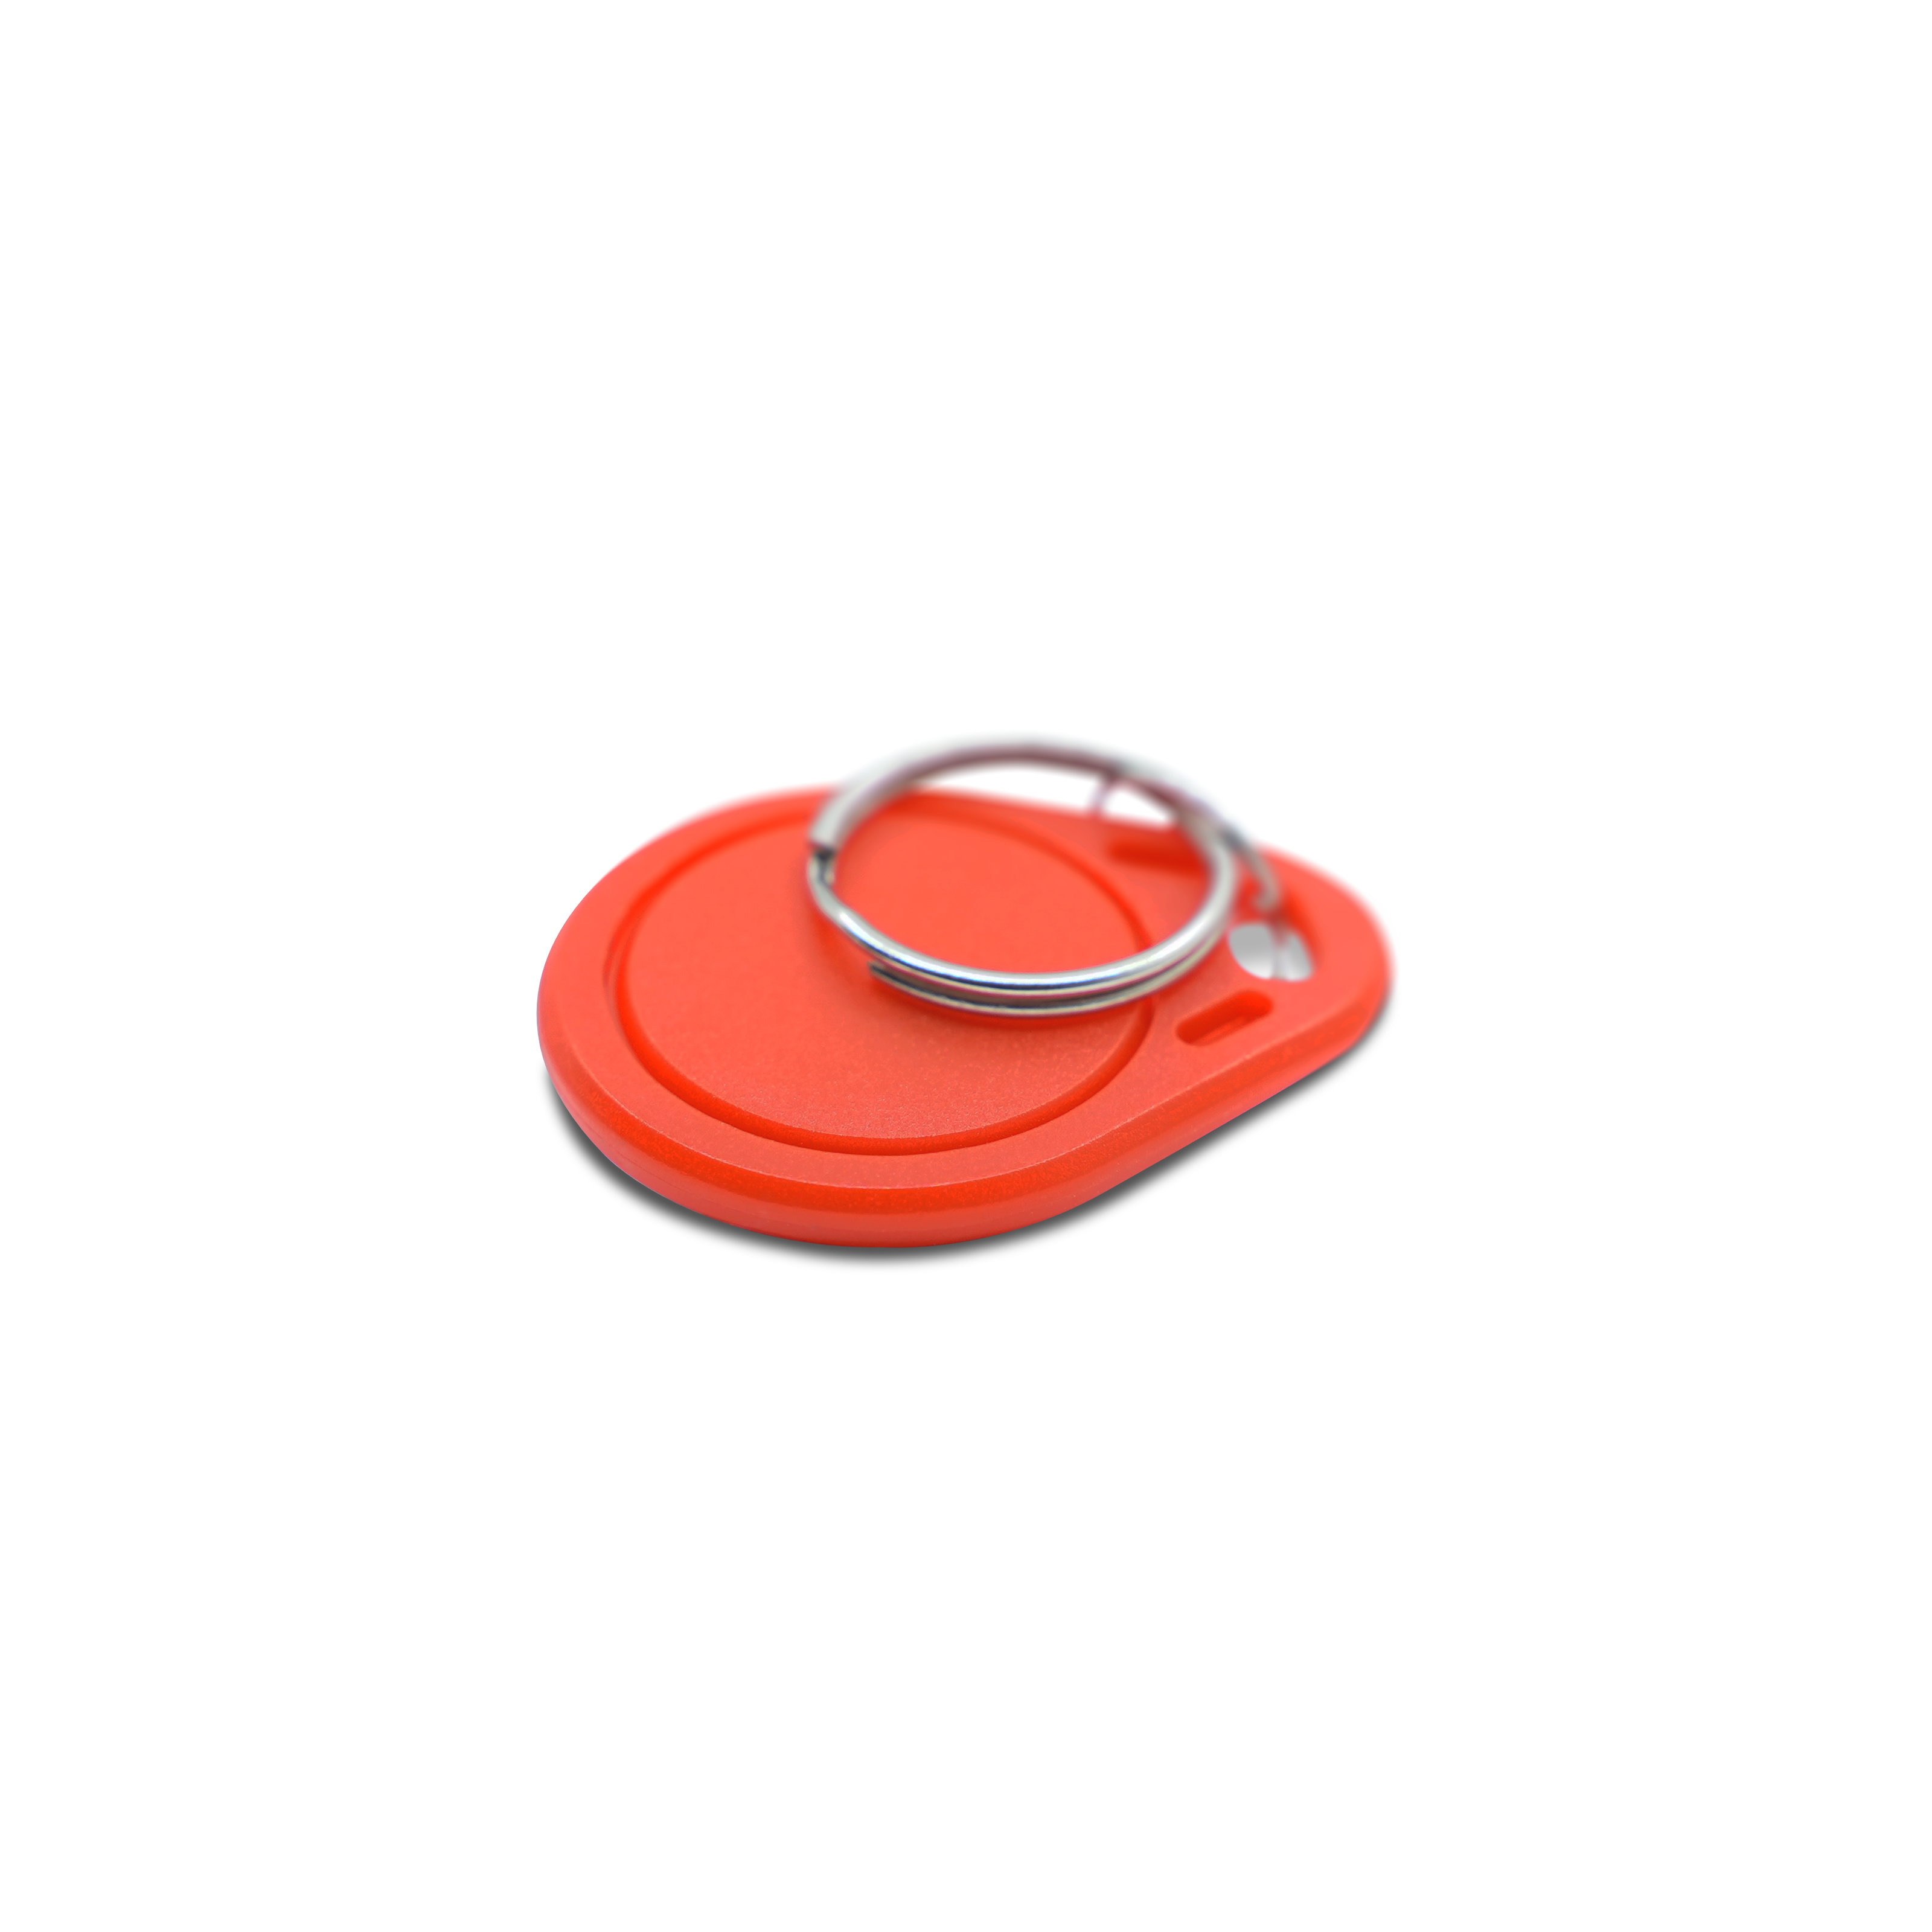 NFC tag ABS - 40 x 32 mm - MIFARE Classic 1k - 1024 Byte - red